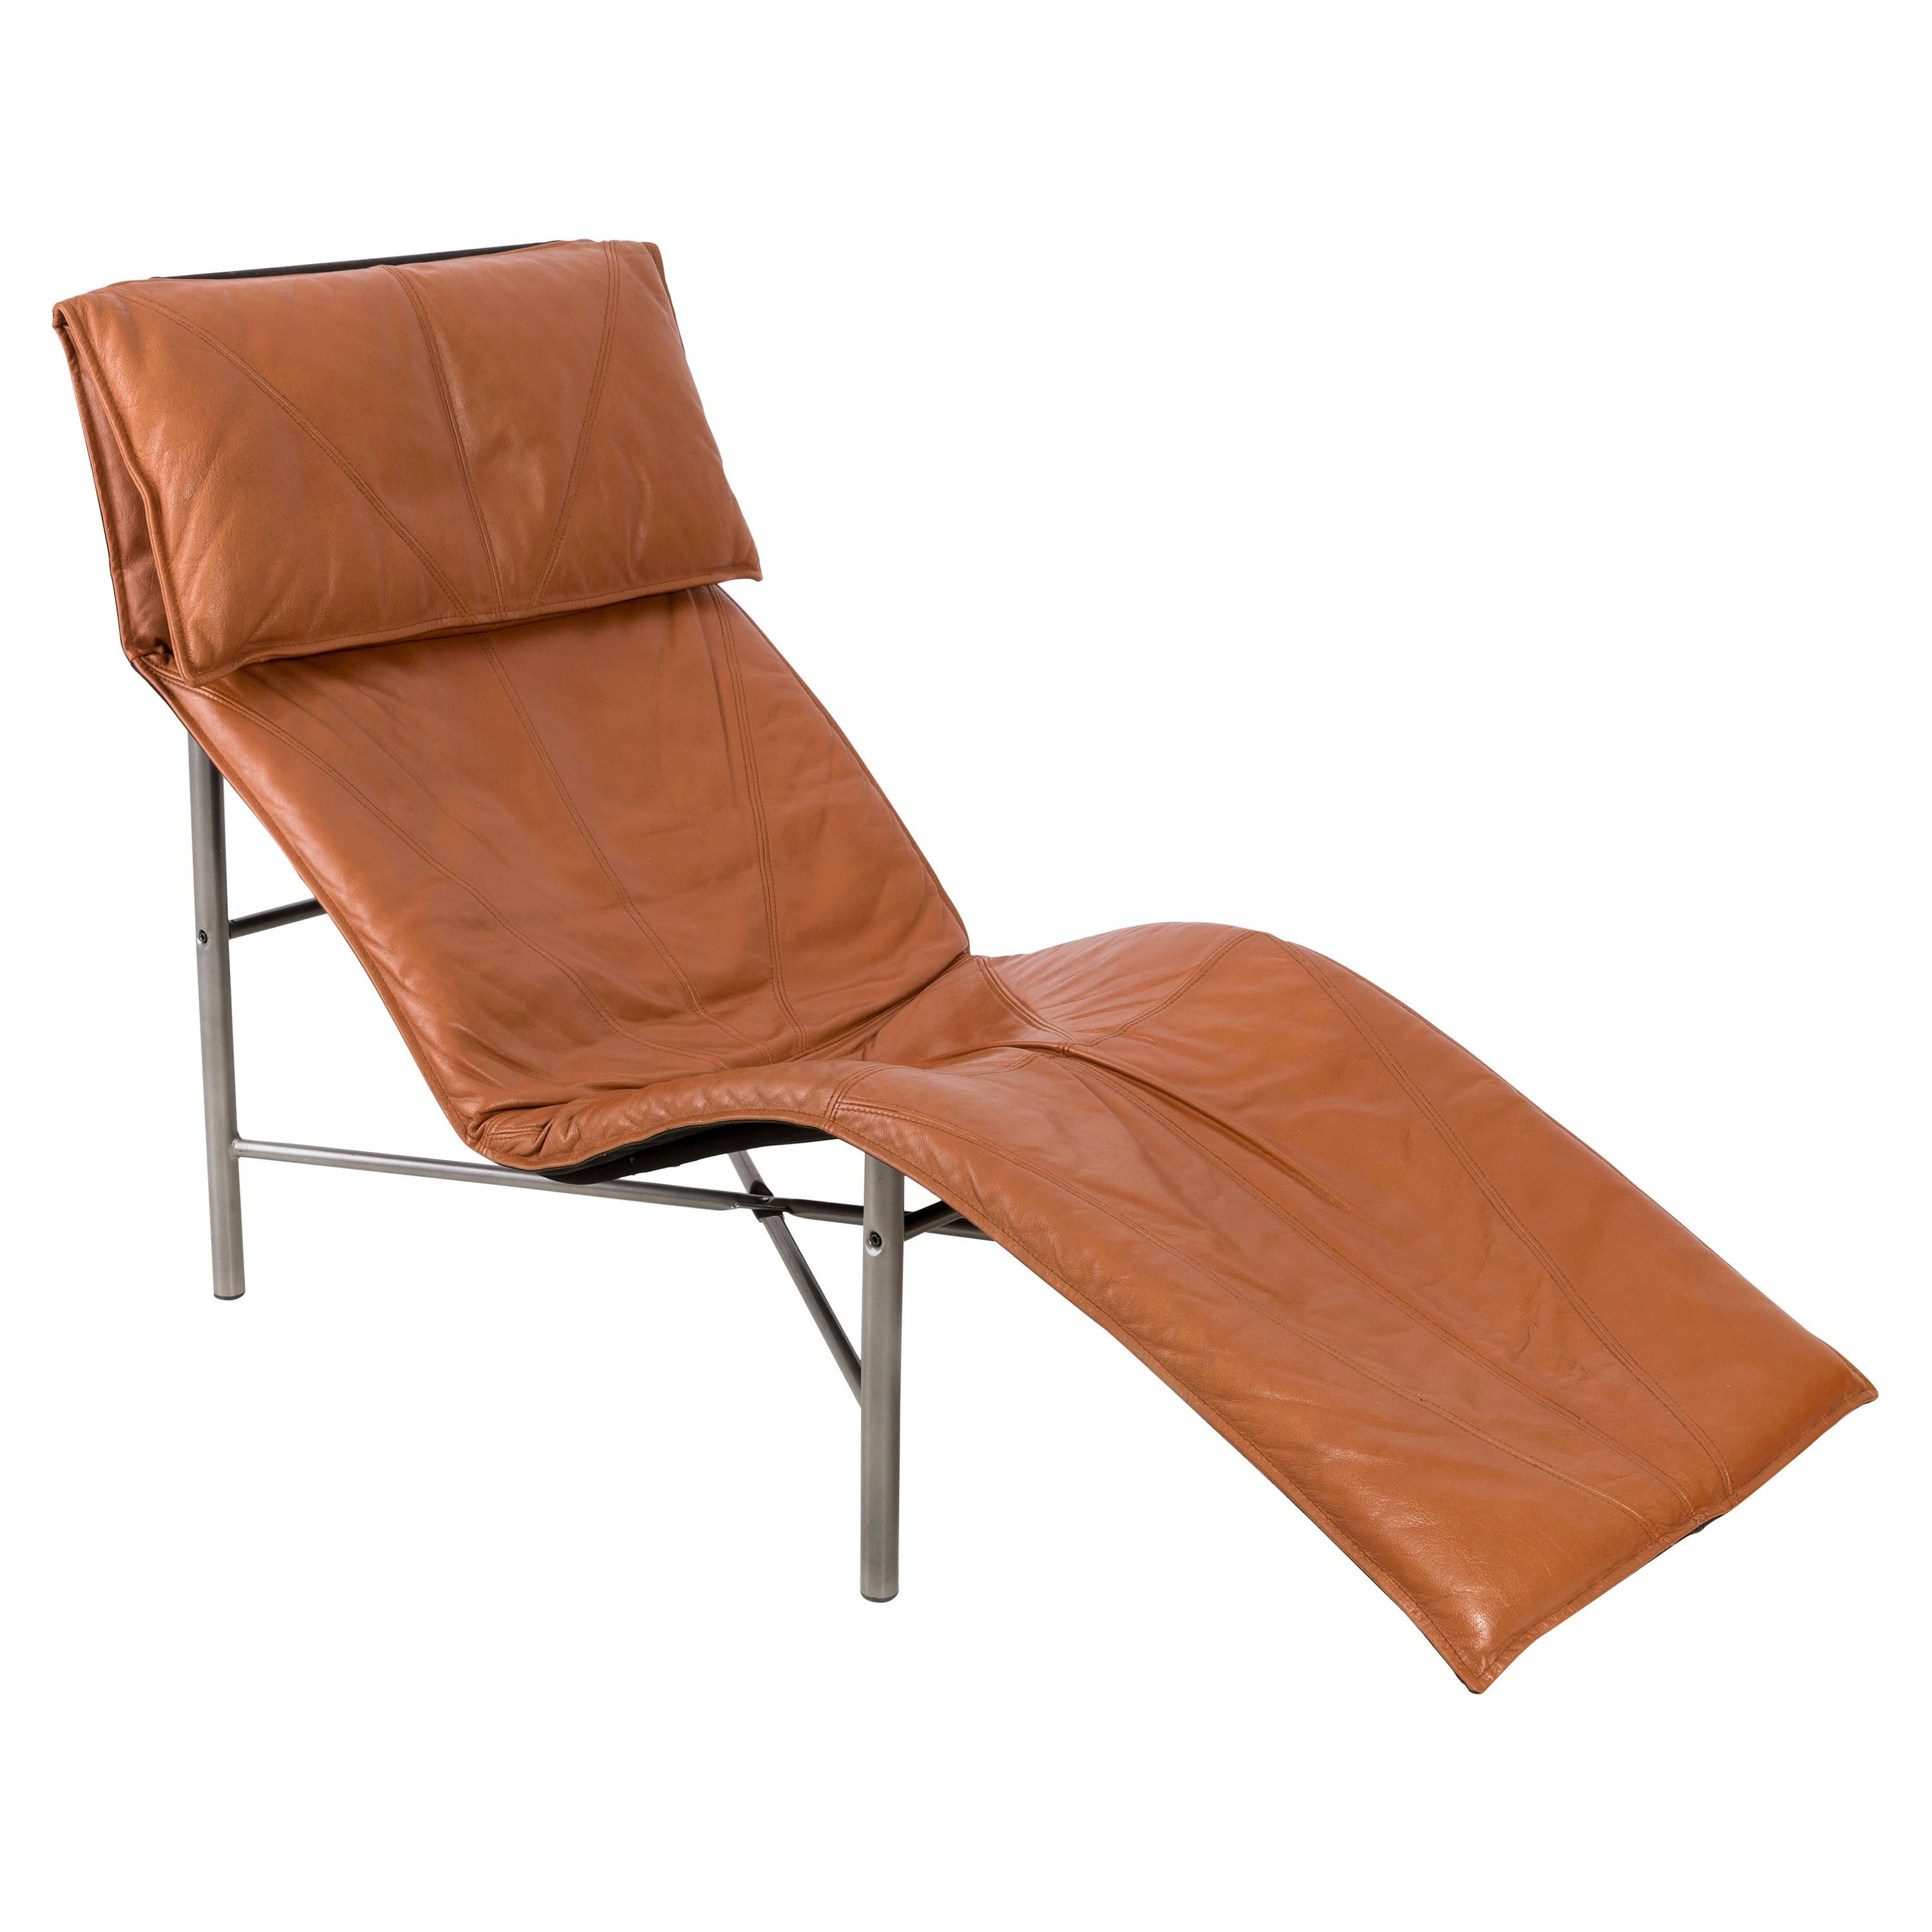 Midcentury Danish Modern Brown Leather Chaise Lounge Chair by Tord Björklund For Sale